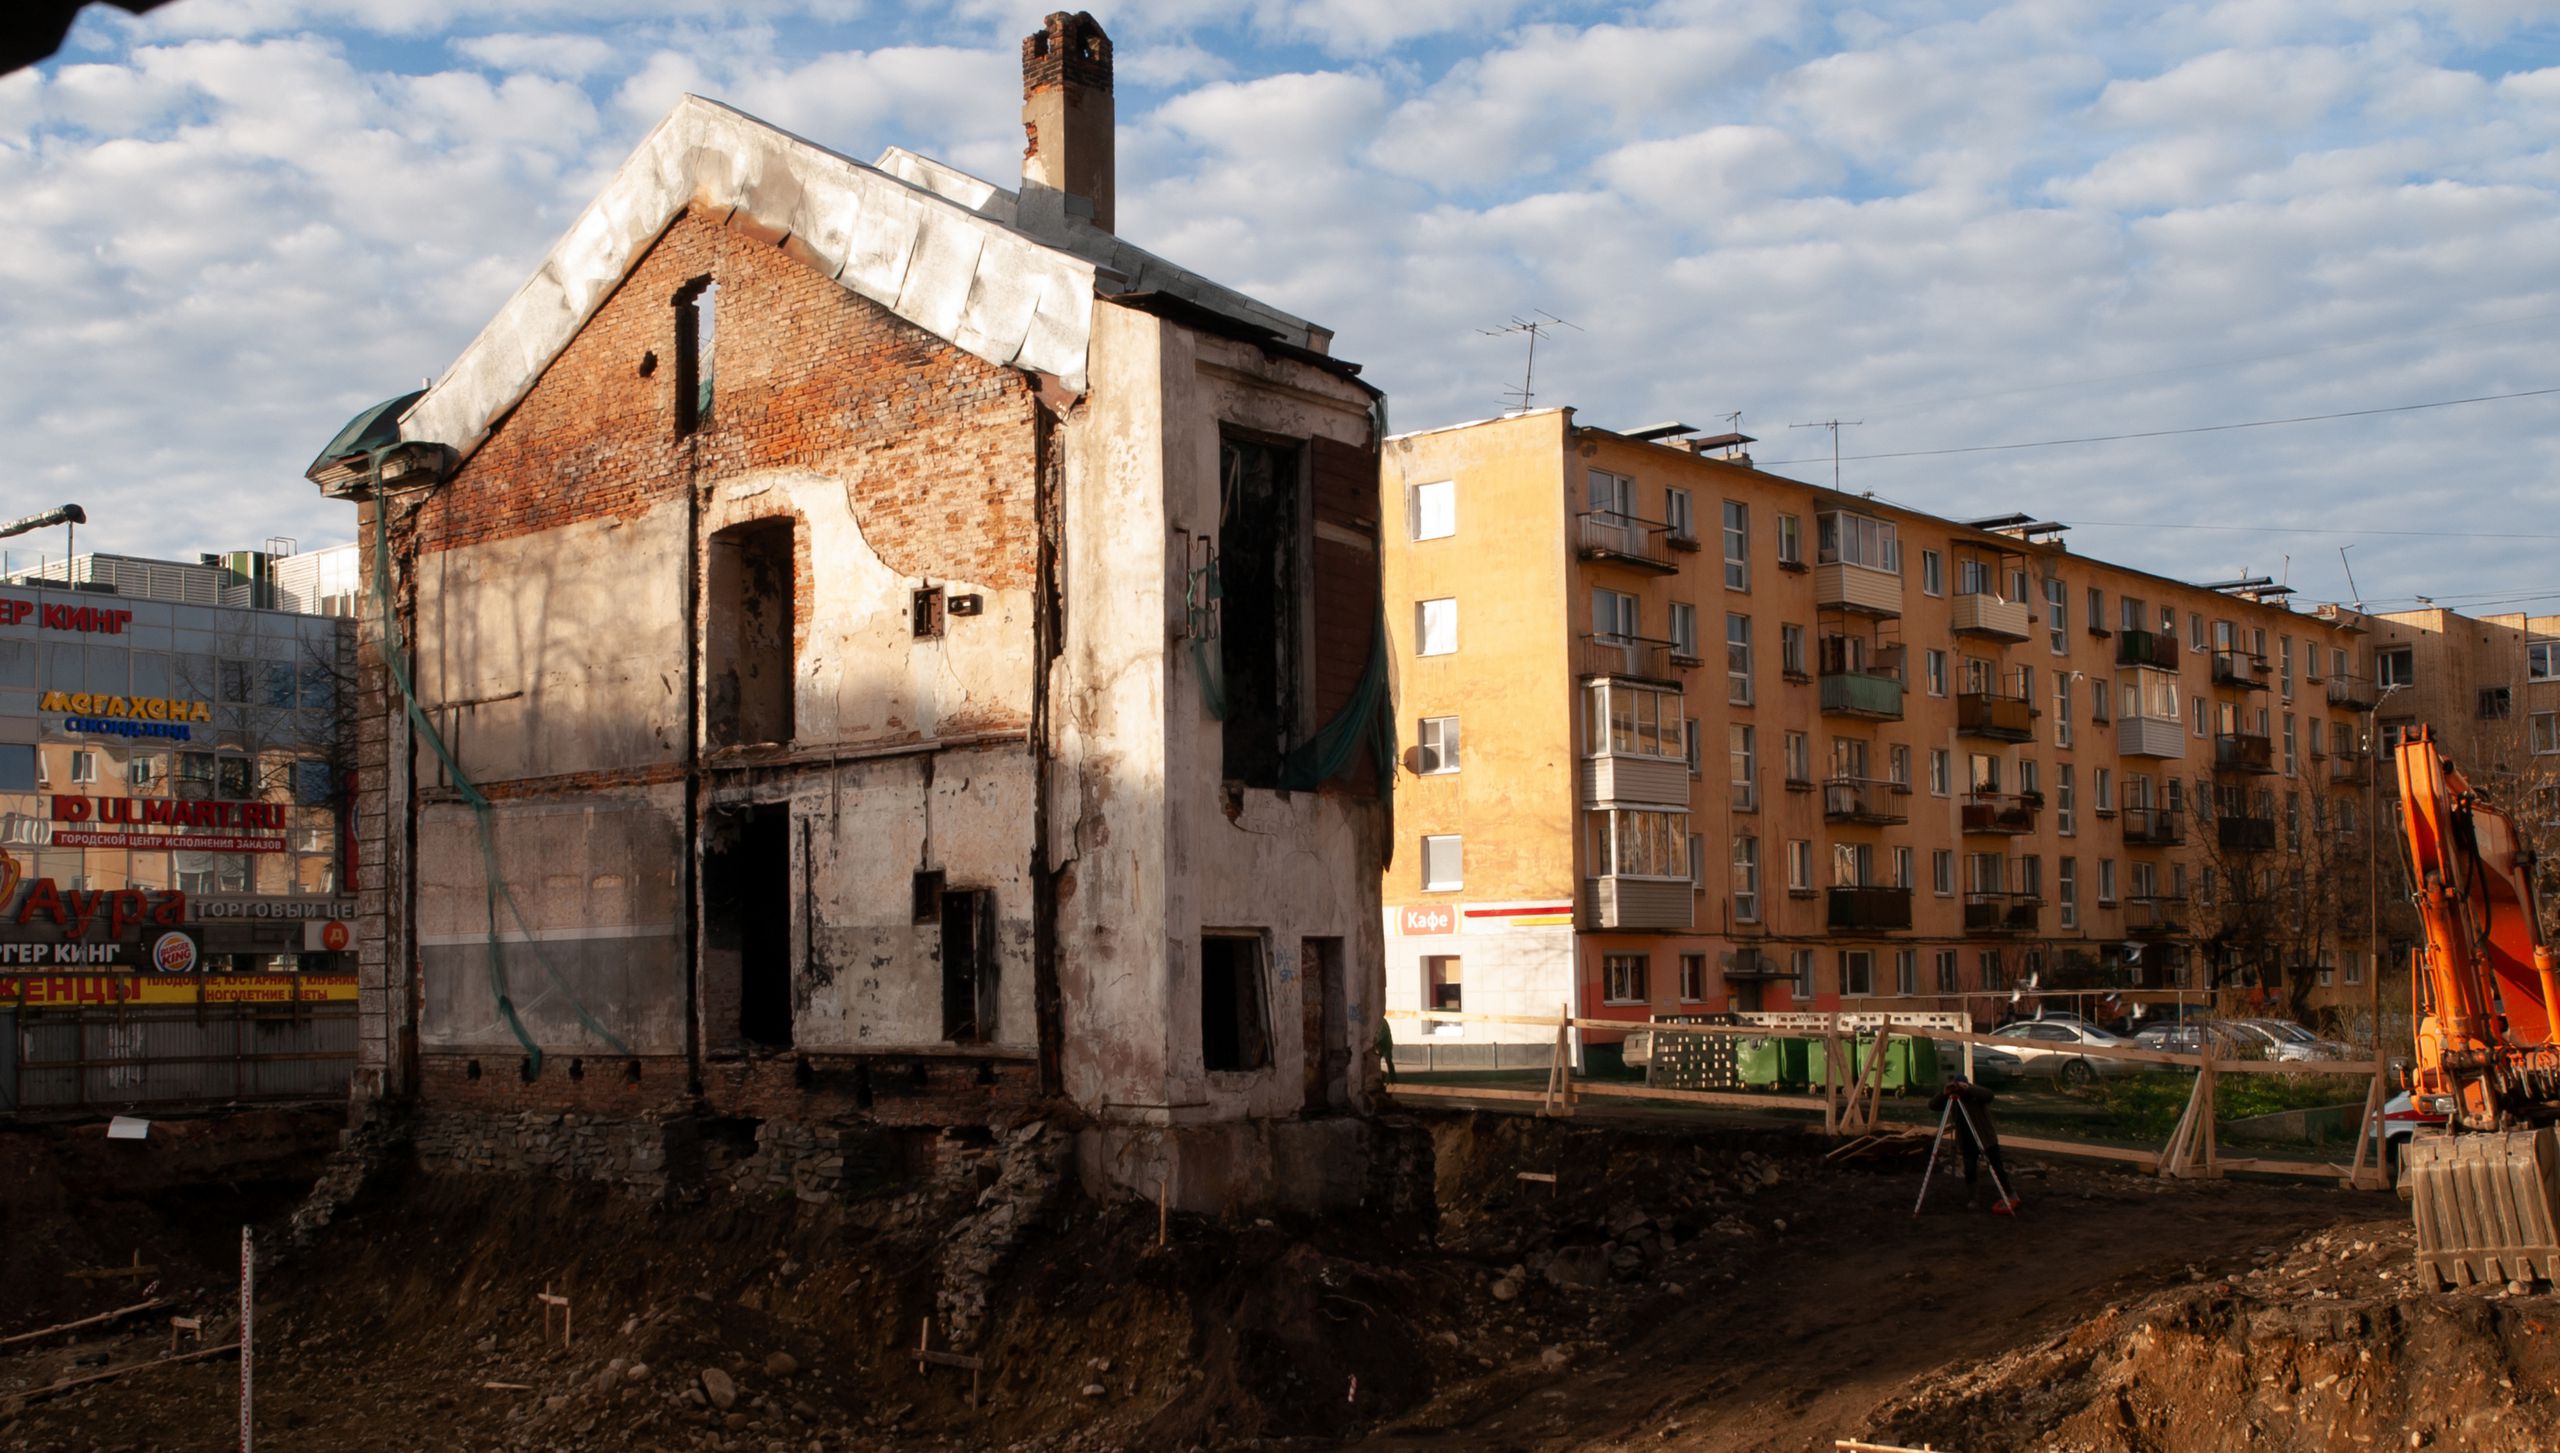 The narrowest house in Petrozavodsk (7)